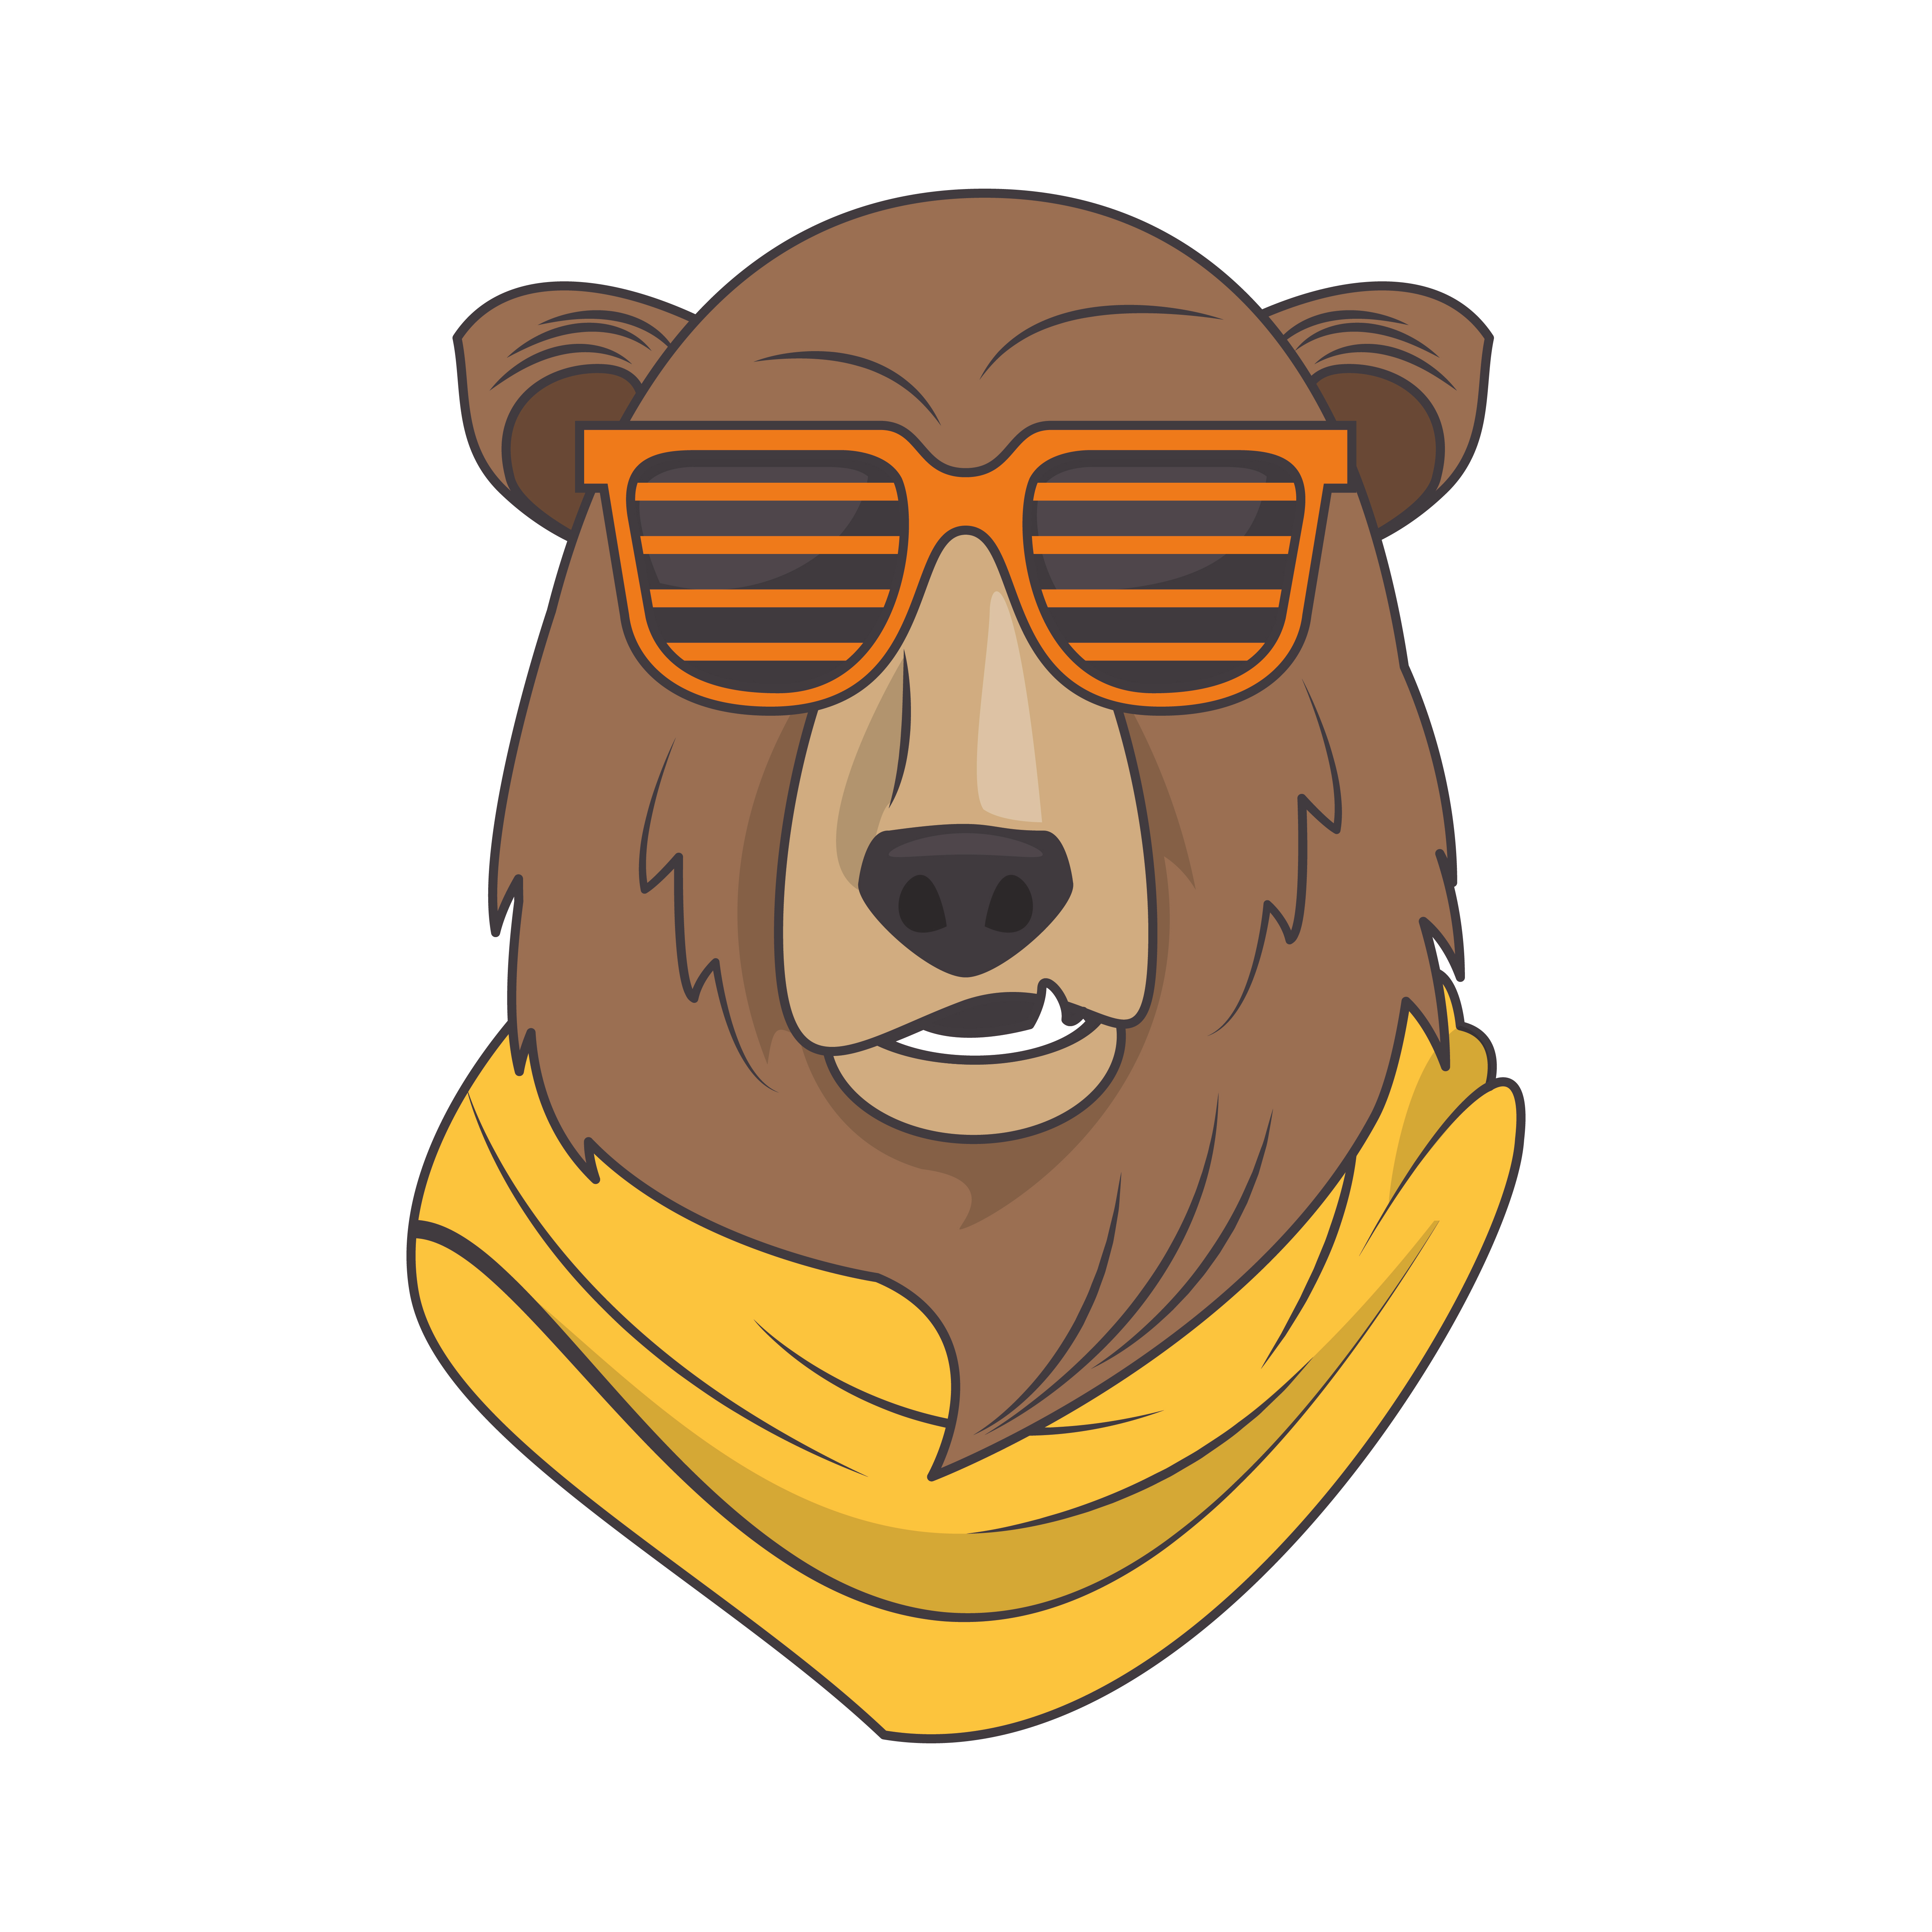 https://static.vecteezy.com/system/resources/previews/002/002/861/original/funny-grizzly-bear-with-sunglasses-cool-style-free-vector.jpg